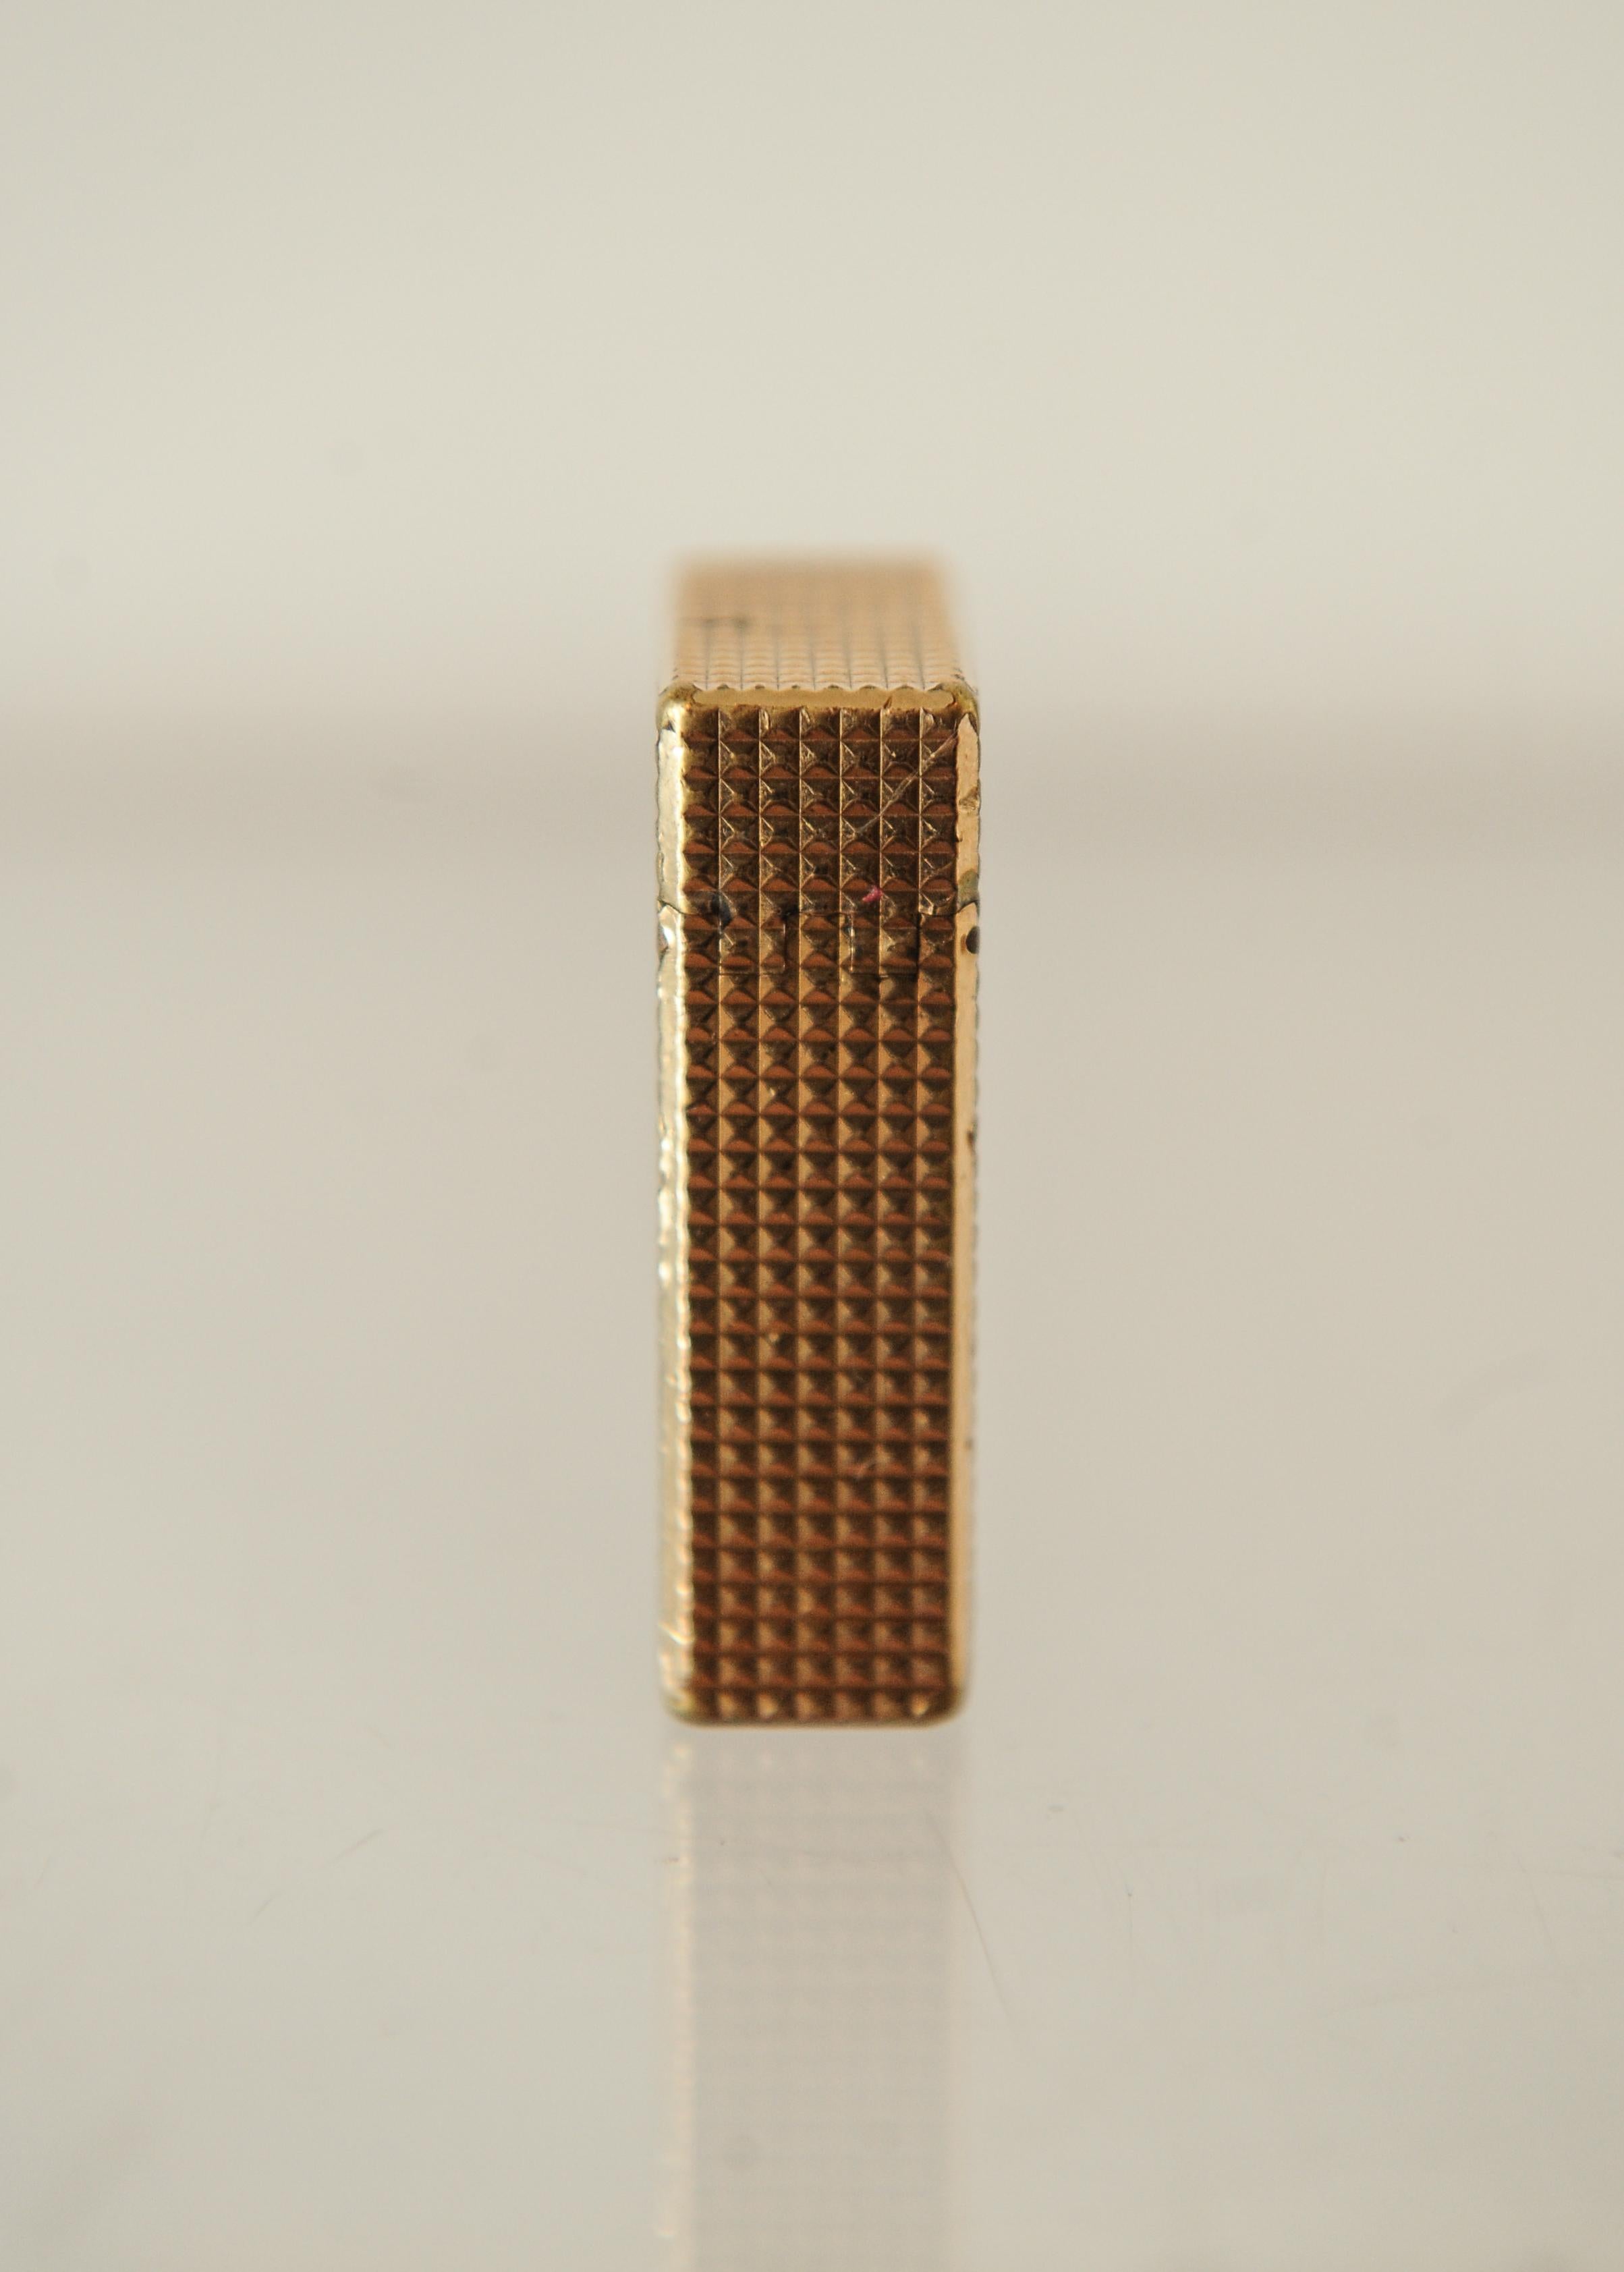 Vintage 1965 ST Dupont Paris Gold-Plated Lighter in Original Box In Good Condition For Sale In High Wycombe, Buckinghamshire